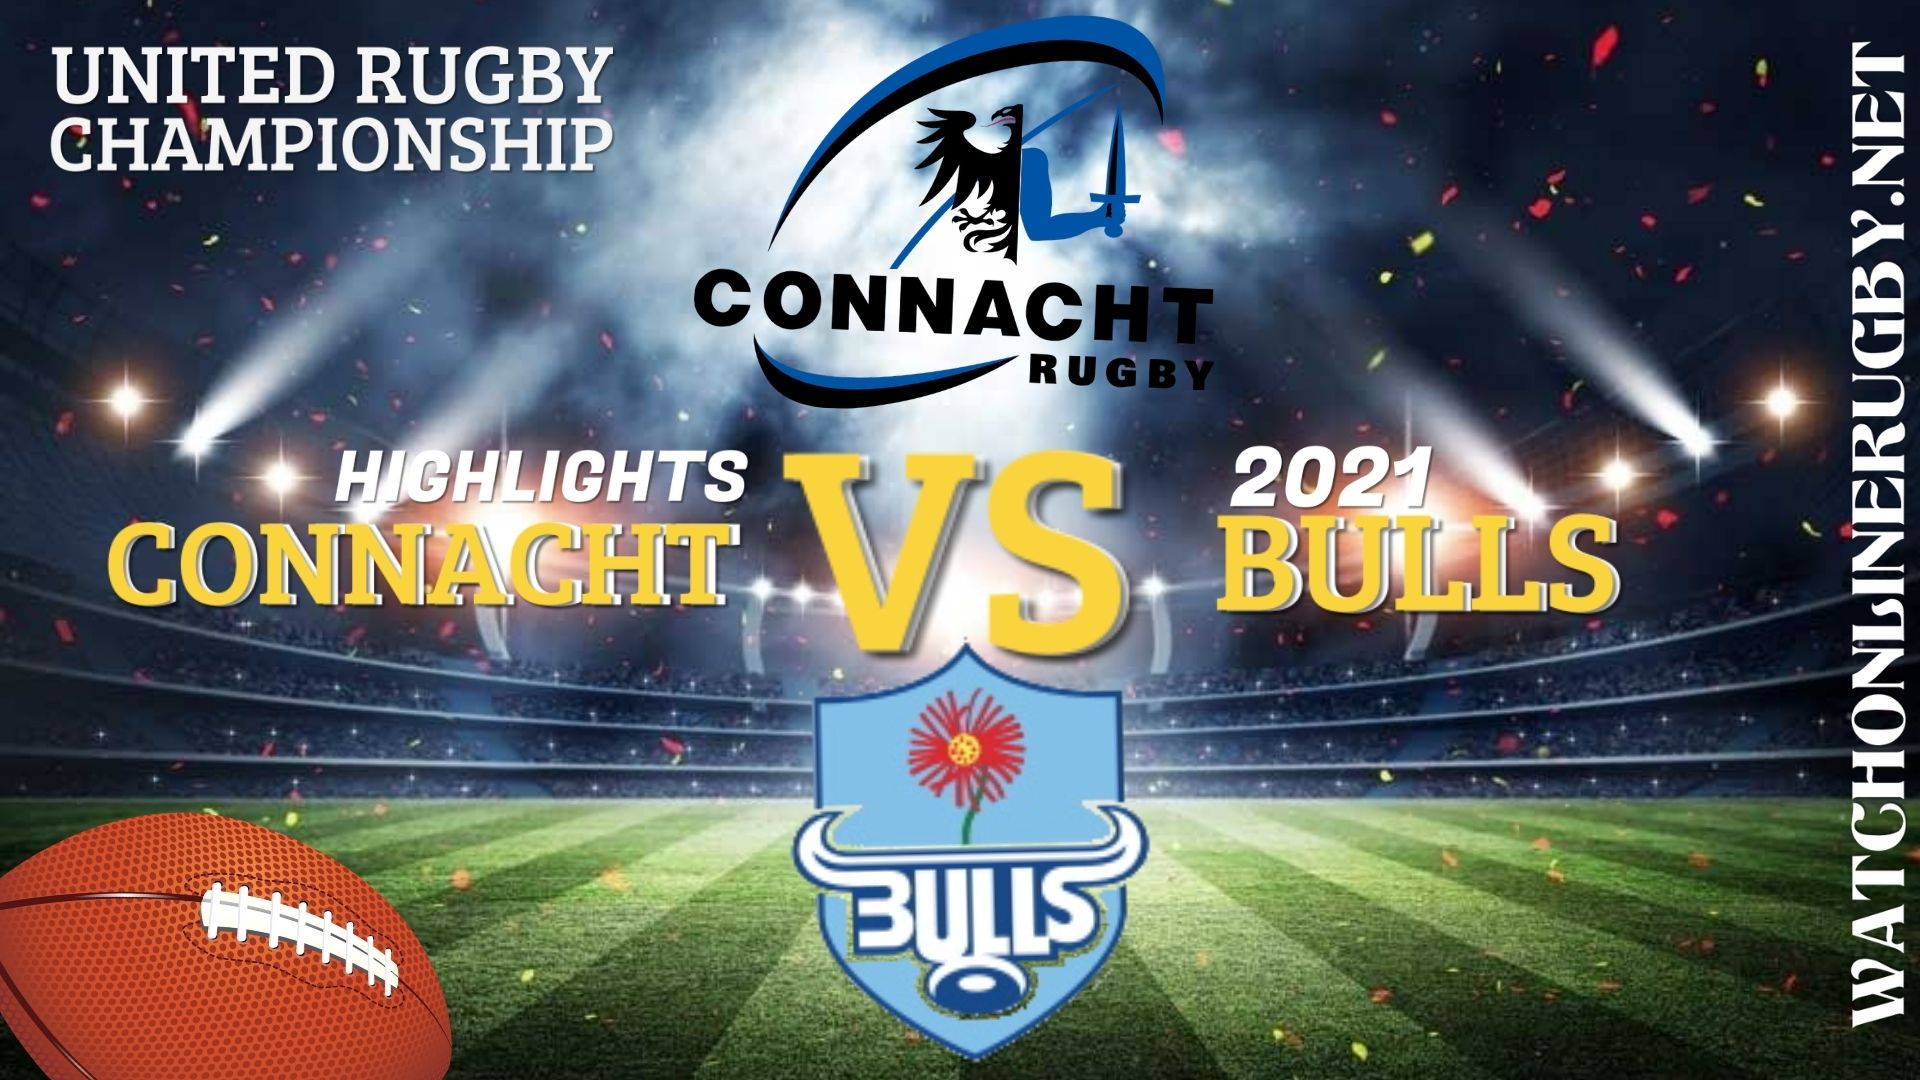 Connacht Vs Bulls United Rugby Championship 2021 RD 2